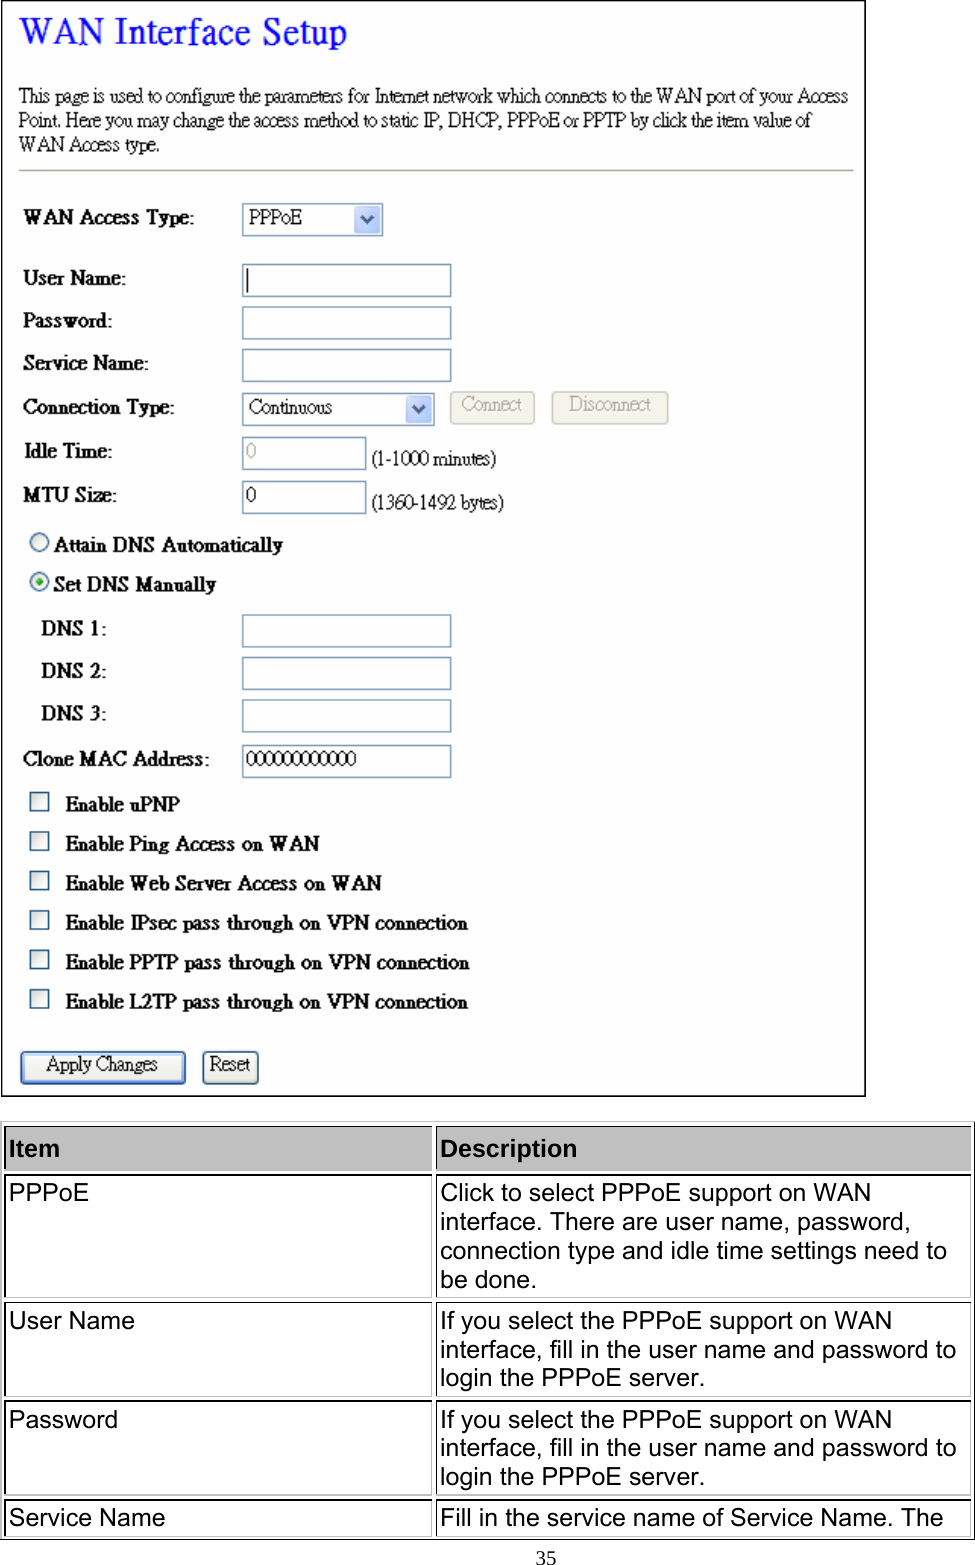   Item  Description PPPoE  Click to select PPPoE support on WAN interface. There are user name, password, connection type and idle time settings need to be done. User Name  If you select the PPPoE support on WAN interface, fill in the user name and password to login the PPPoE server. Password  If you select the PPPoE support on WAN interface, fill in the user name and password to login the PPPoE server. Service Name  Fill in the service name of Service Name. The     35